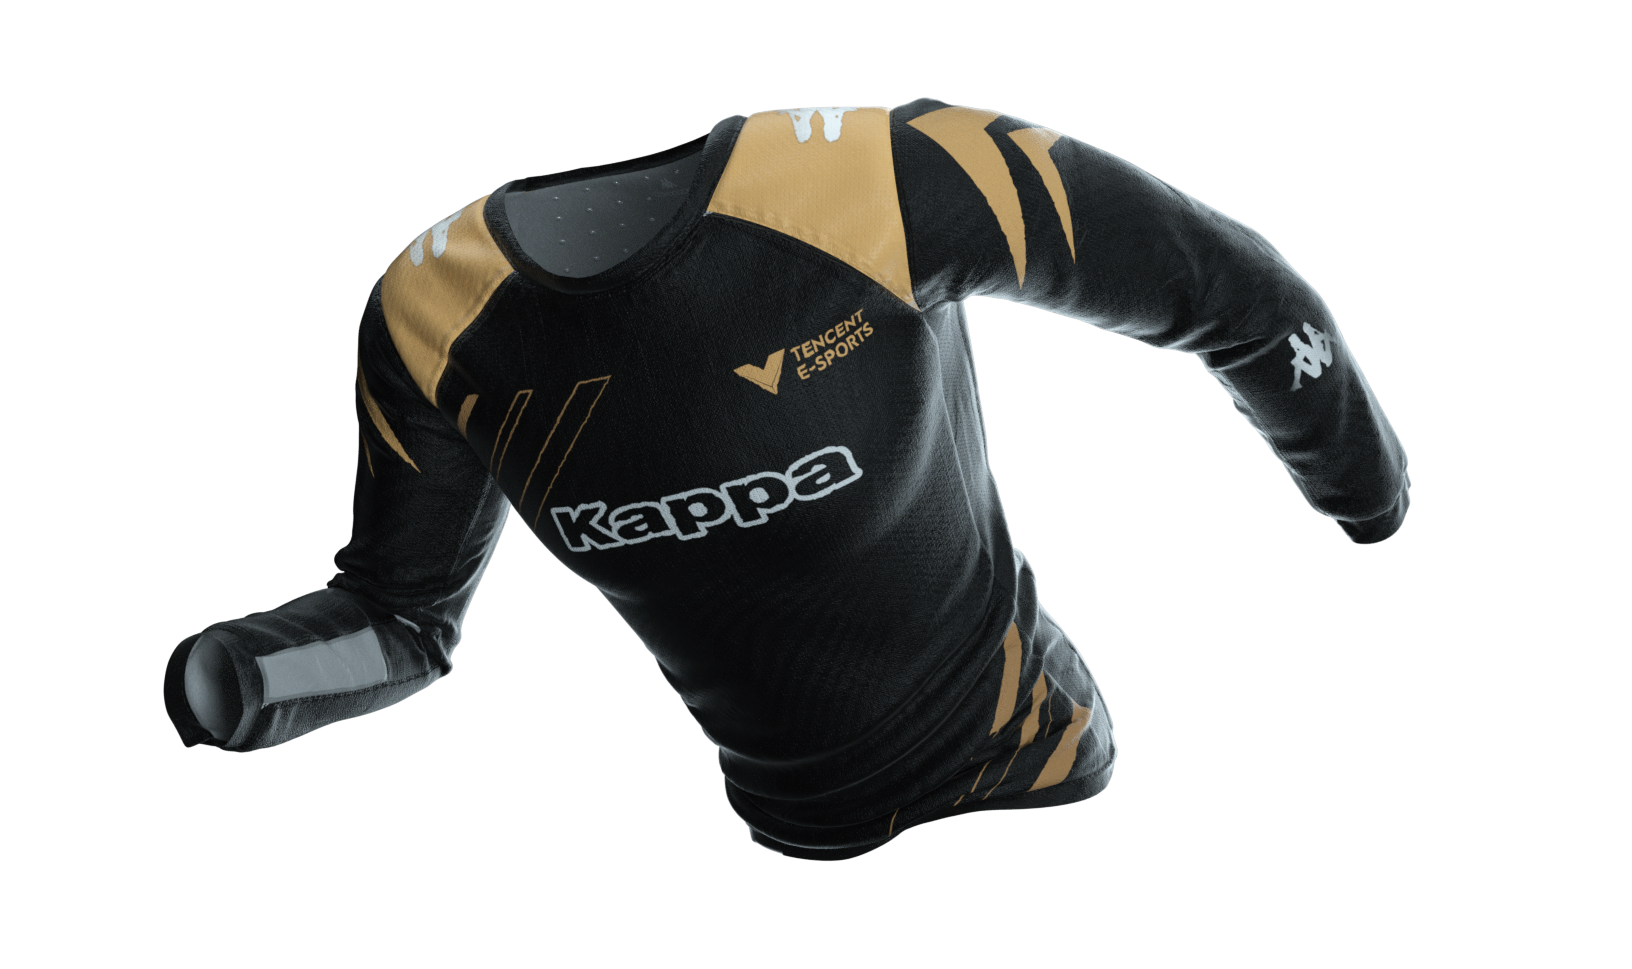 Kappa and Hyosung Collaborate to Launch K-Spirit Performance Apparel for E- Sports – Performance Textiles